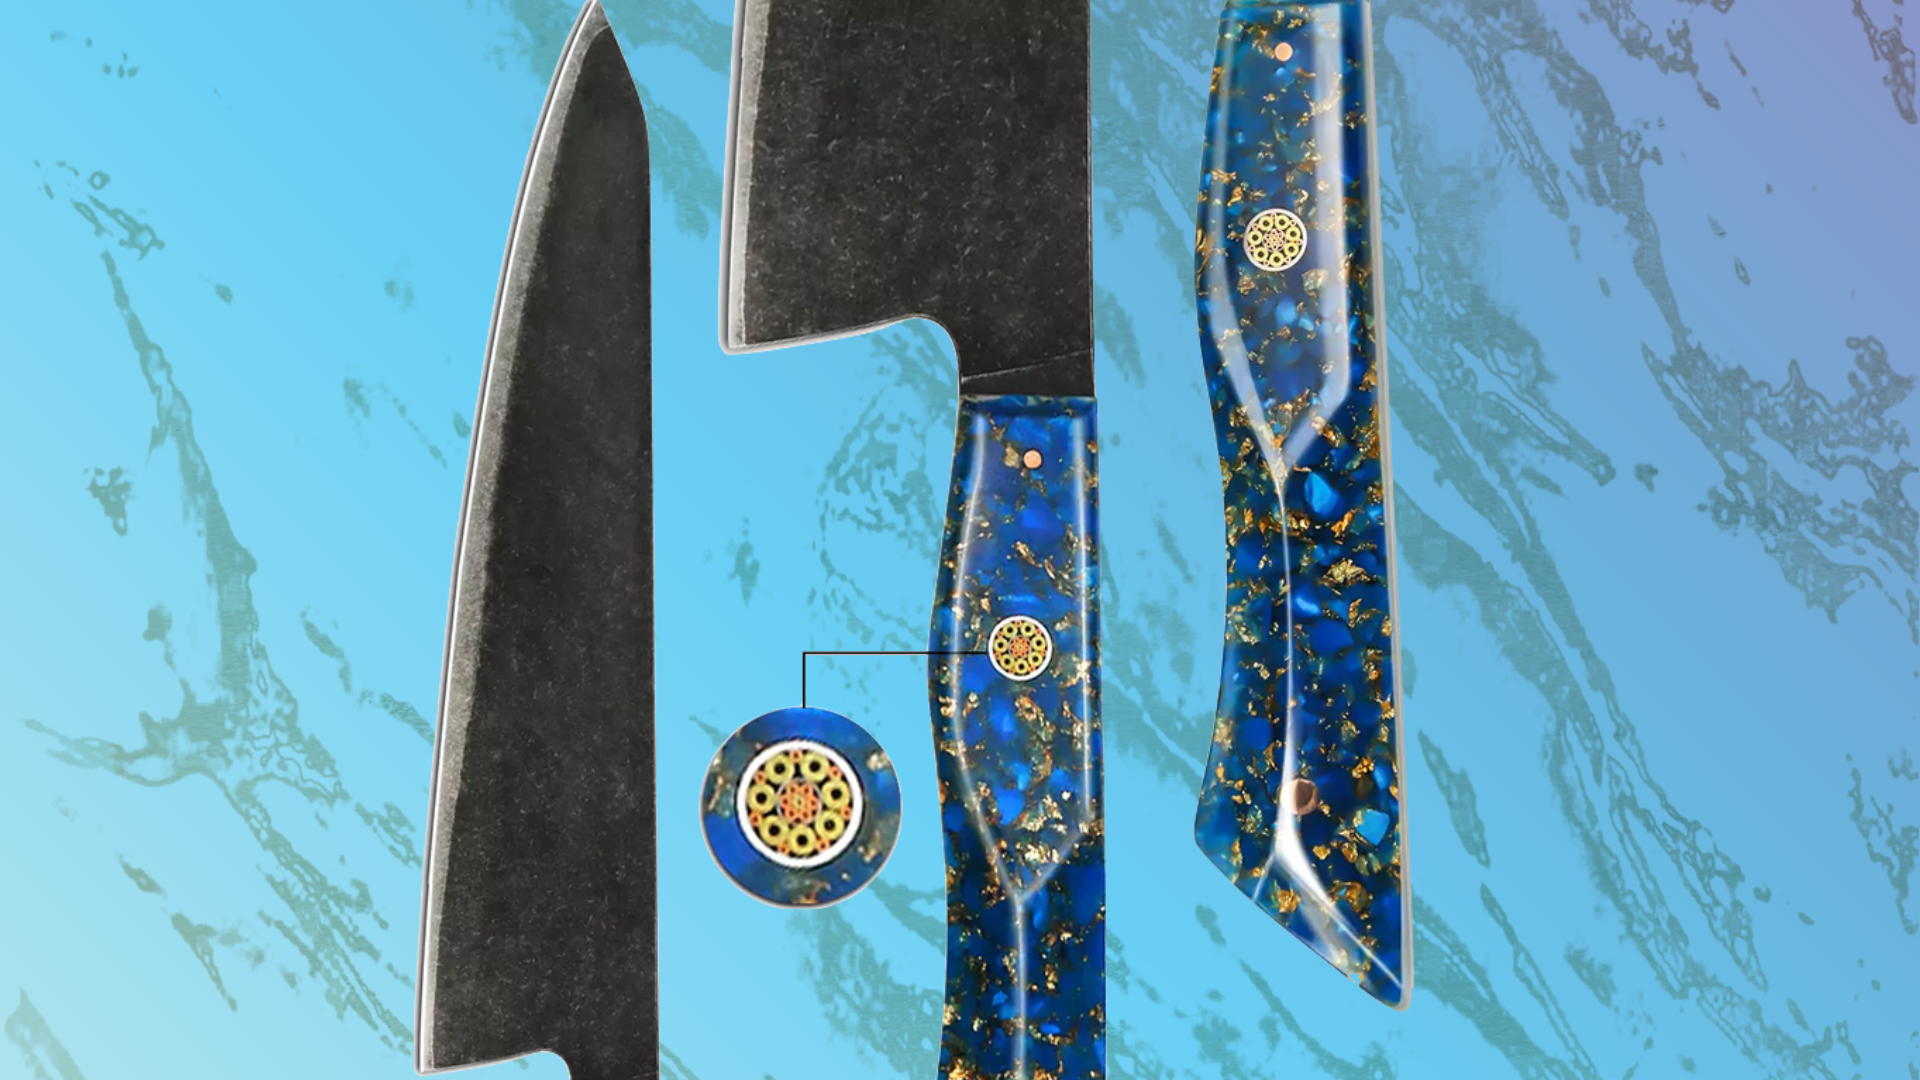 three knives on a blue background